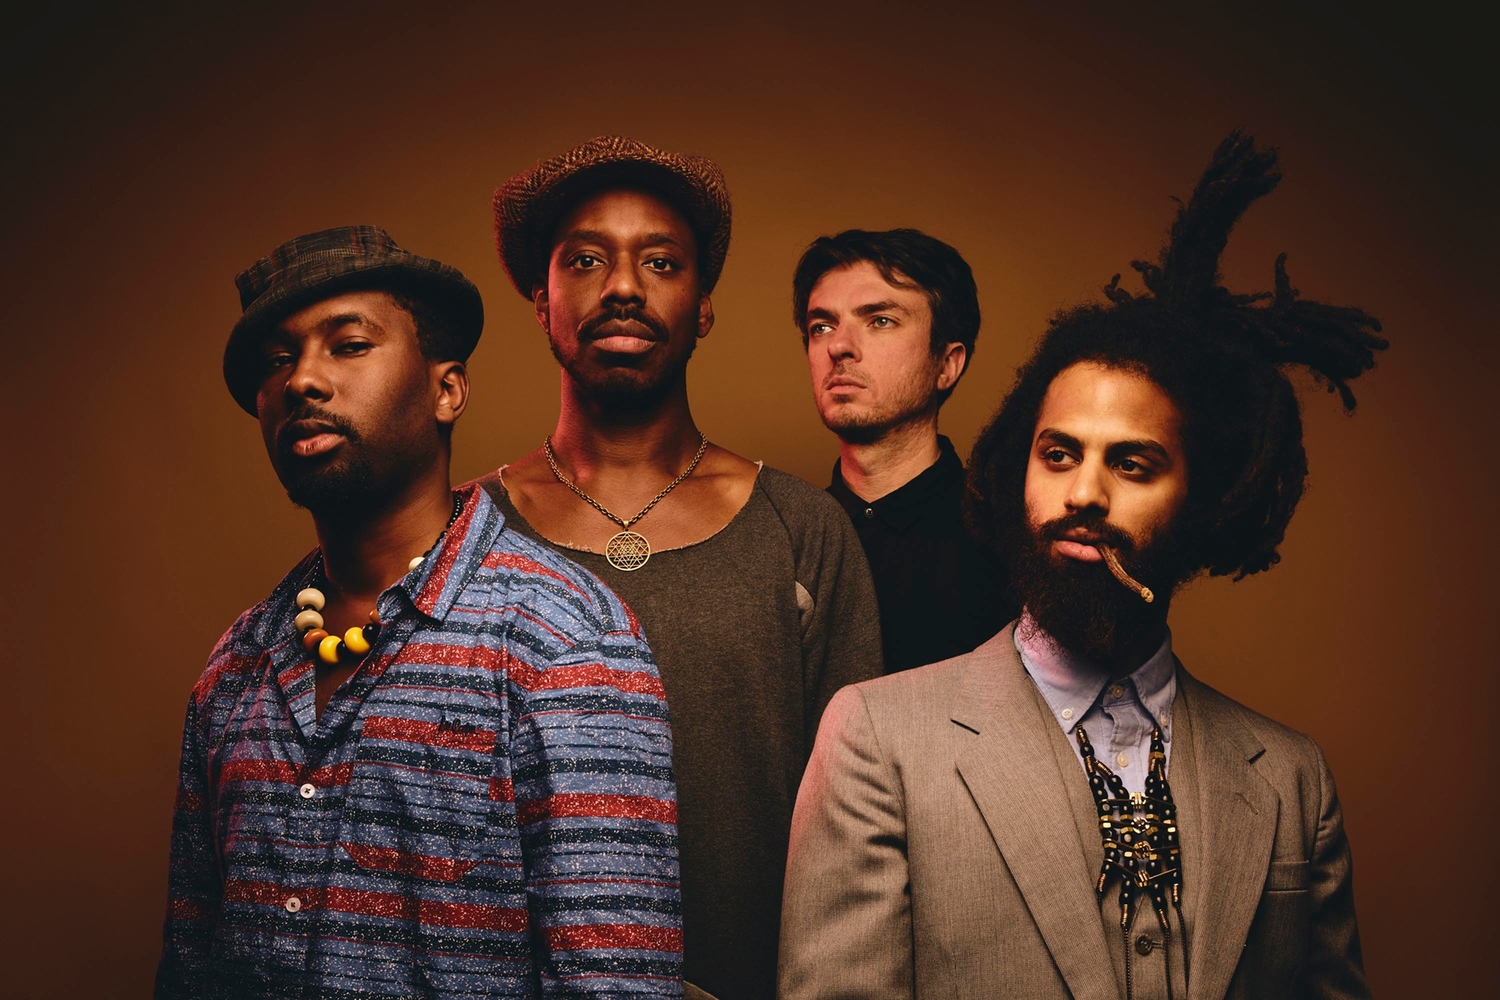 “There was never an intention to make a statement” - Sons of Kemet talk ‘Your Queen Is A Reptile’